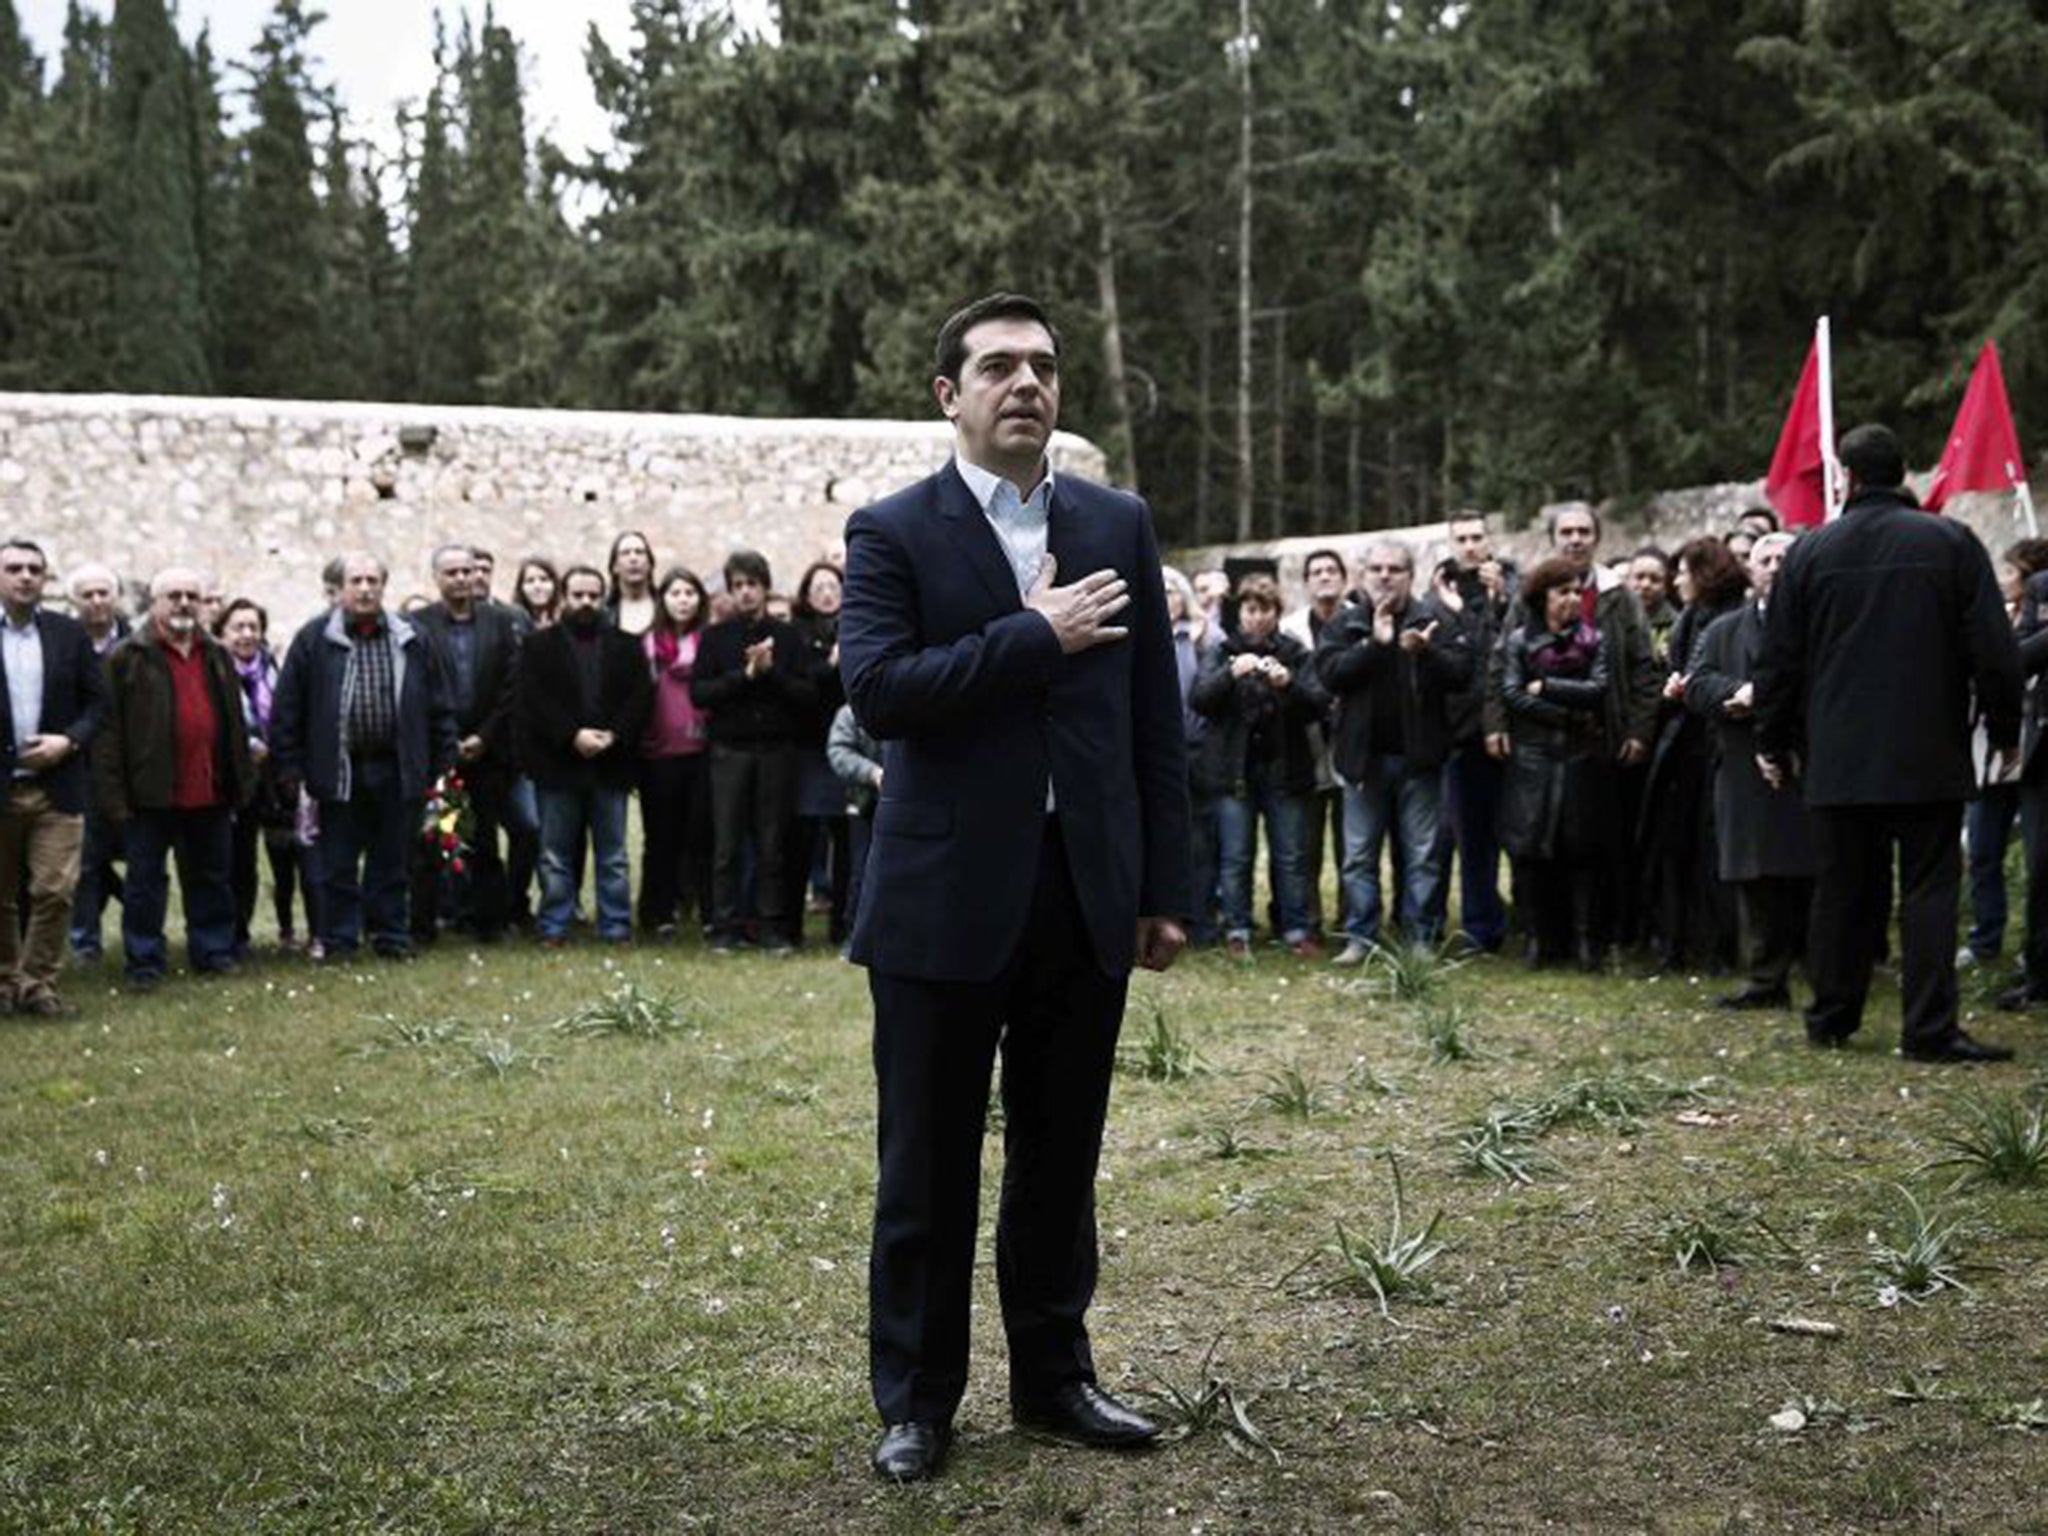 Greece’s newly appointed Prime Minister, Alexis Tsipras, at a ceremony in Athens yesterday, marking the execution of Greek resistance members by the Nazis during the Second World War (Reuters)